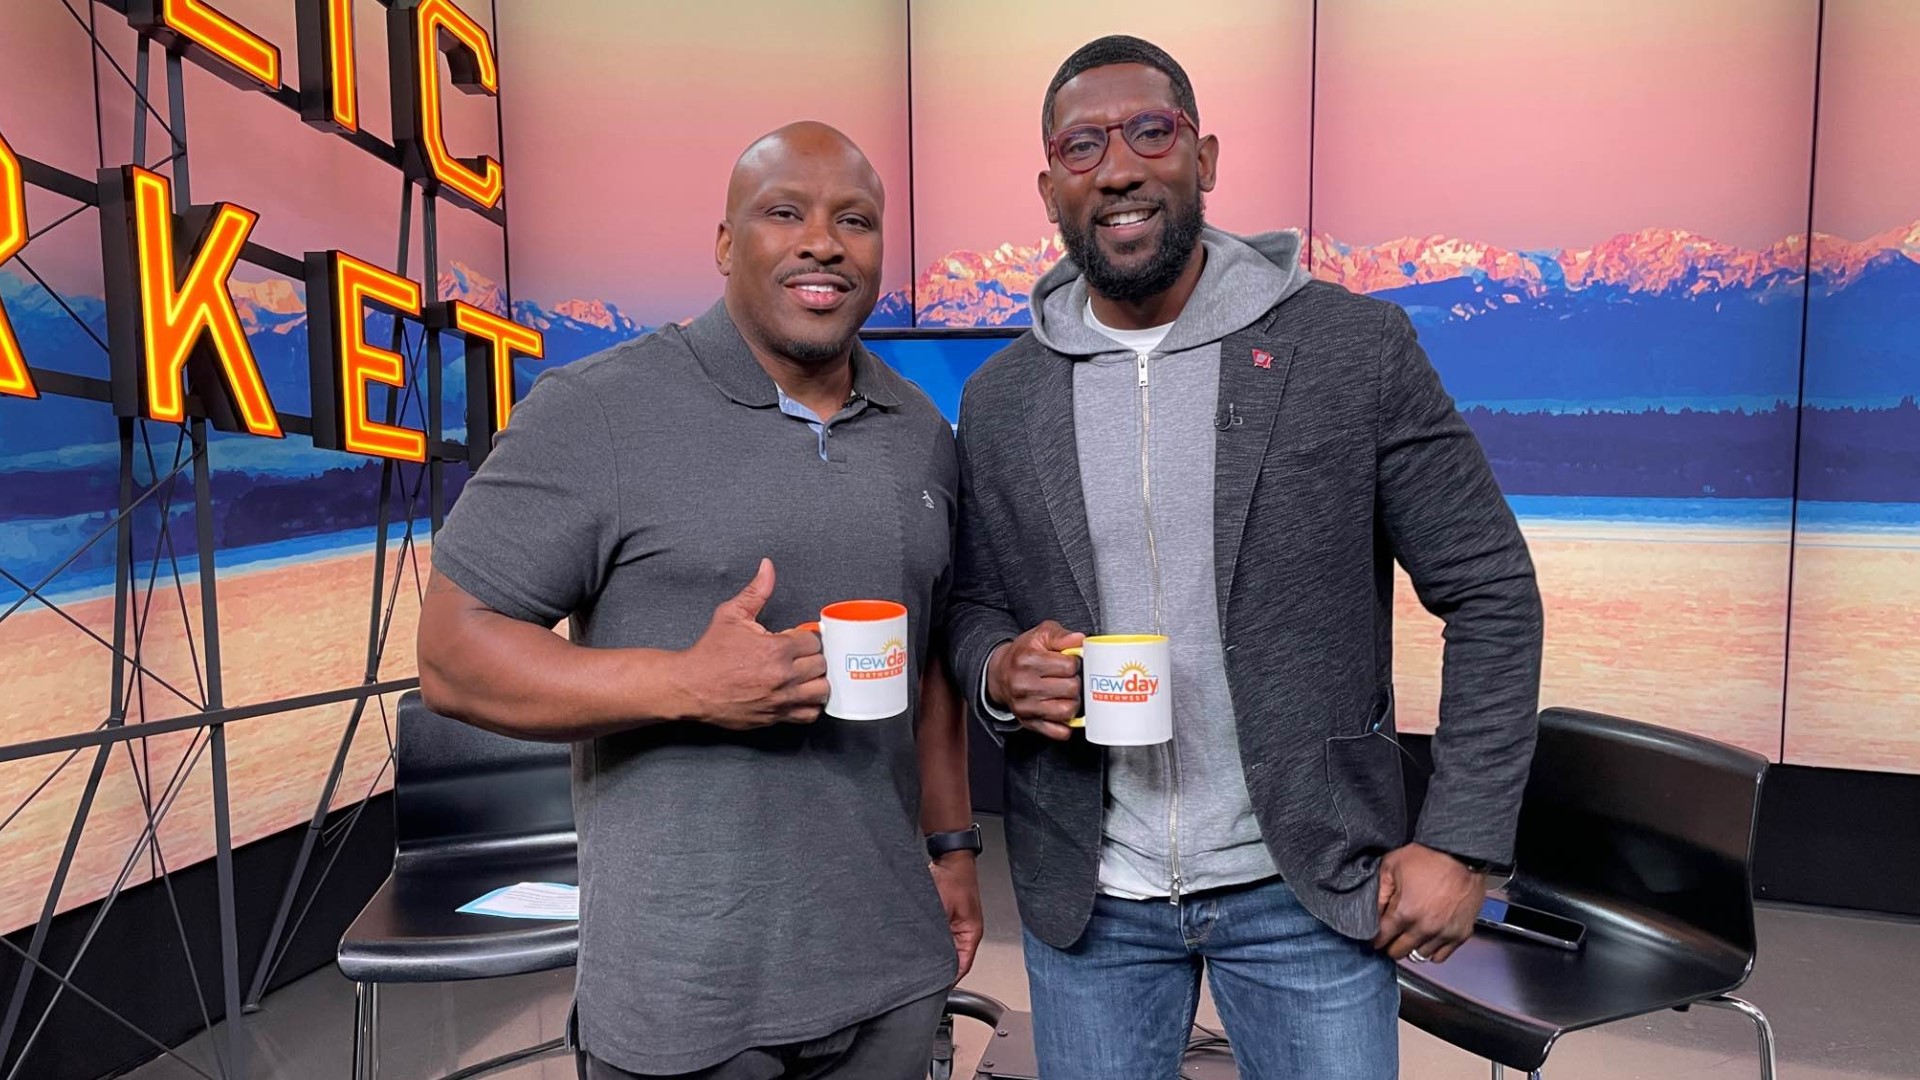 Terry Hollimon and Marcus Trufant from the Barbershop Podcast joined us to talk about Russell Wilson and the future of the Hawks. #newdaynw